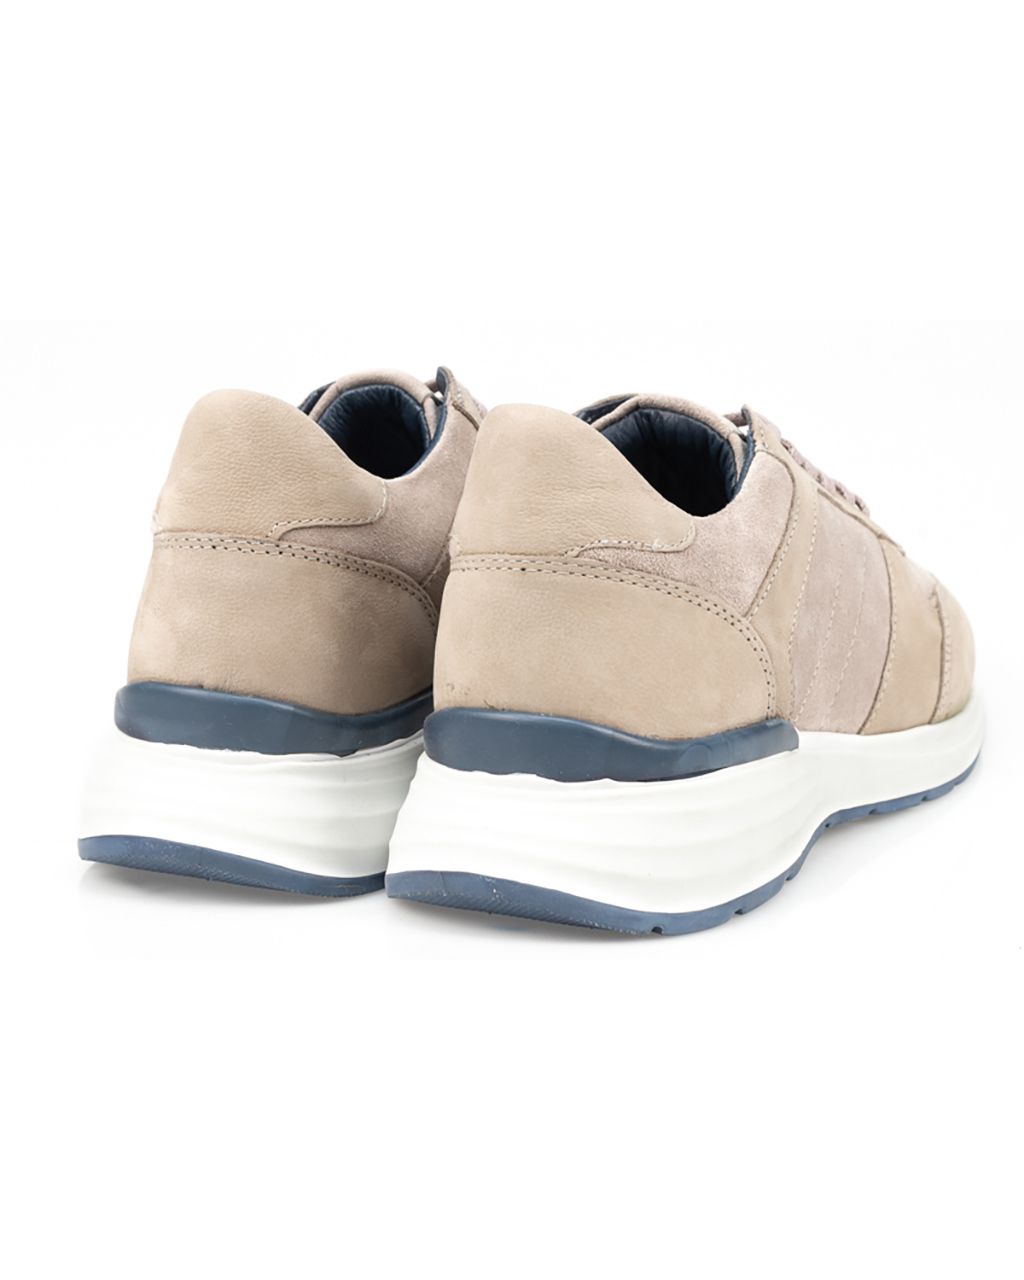 Campbell Classic Sneakers Beige uni 066339-001-40